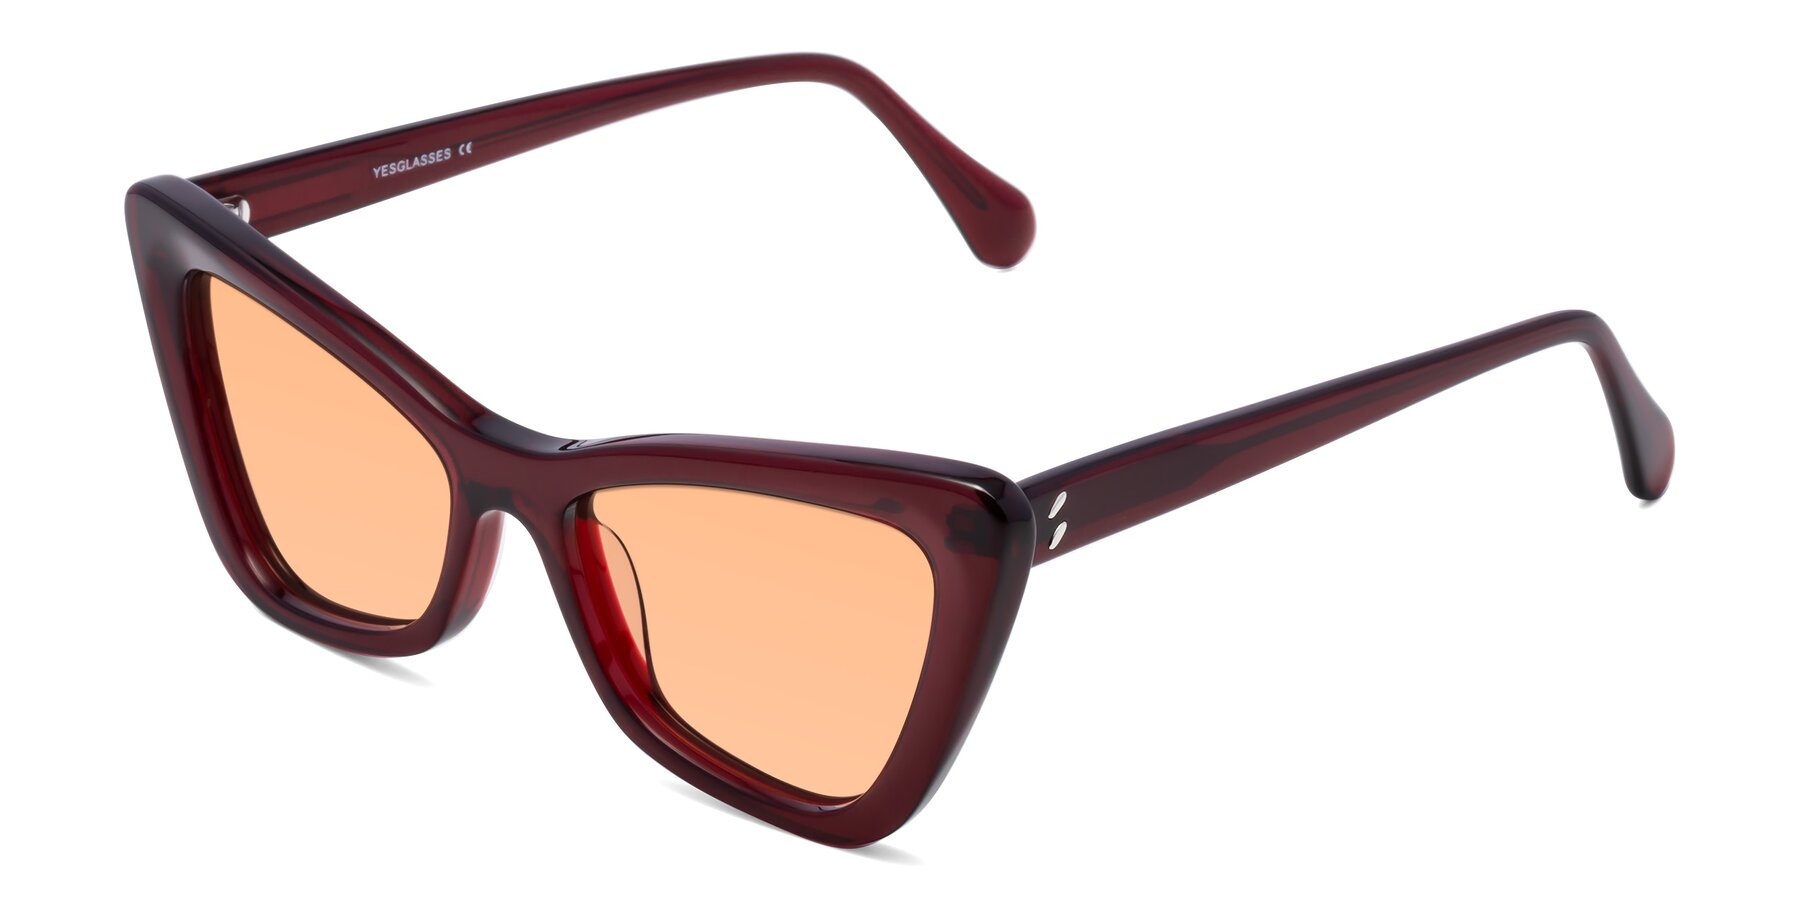 Angle of Rua in Wine with Light Orange Tinted Lenses